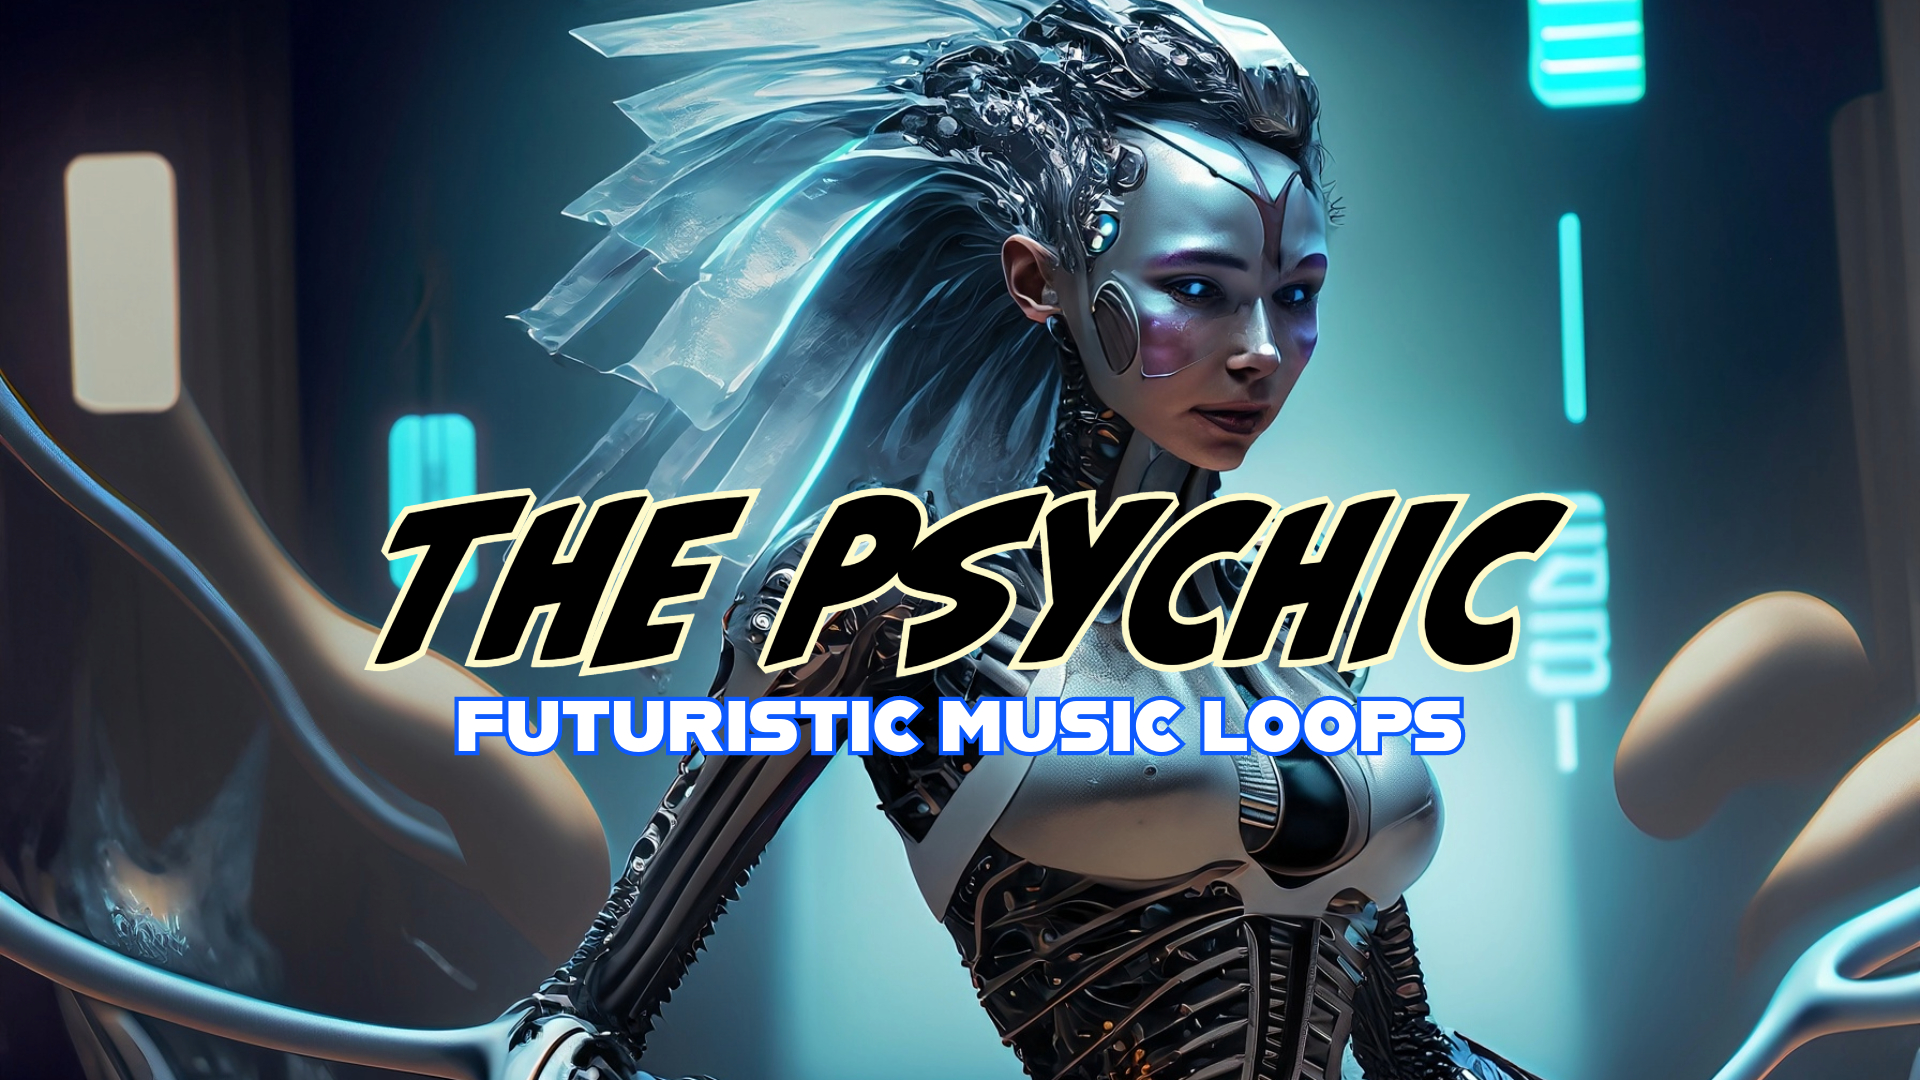 Futuristic Music Loops: The Psychic